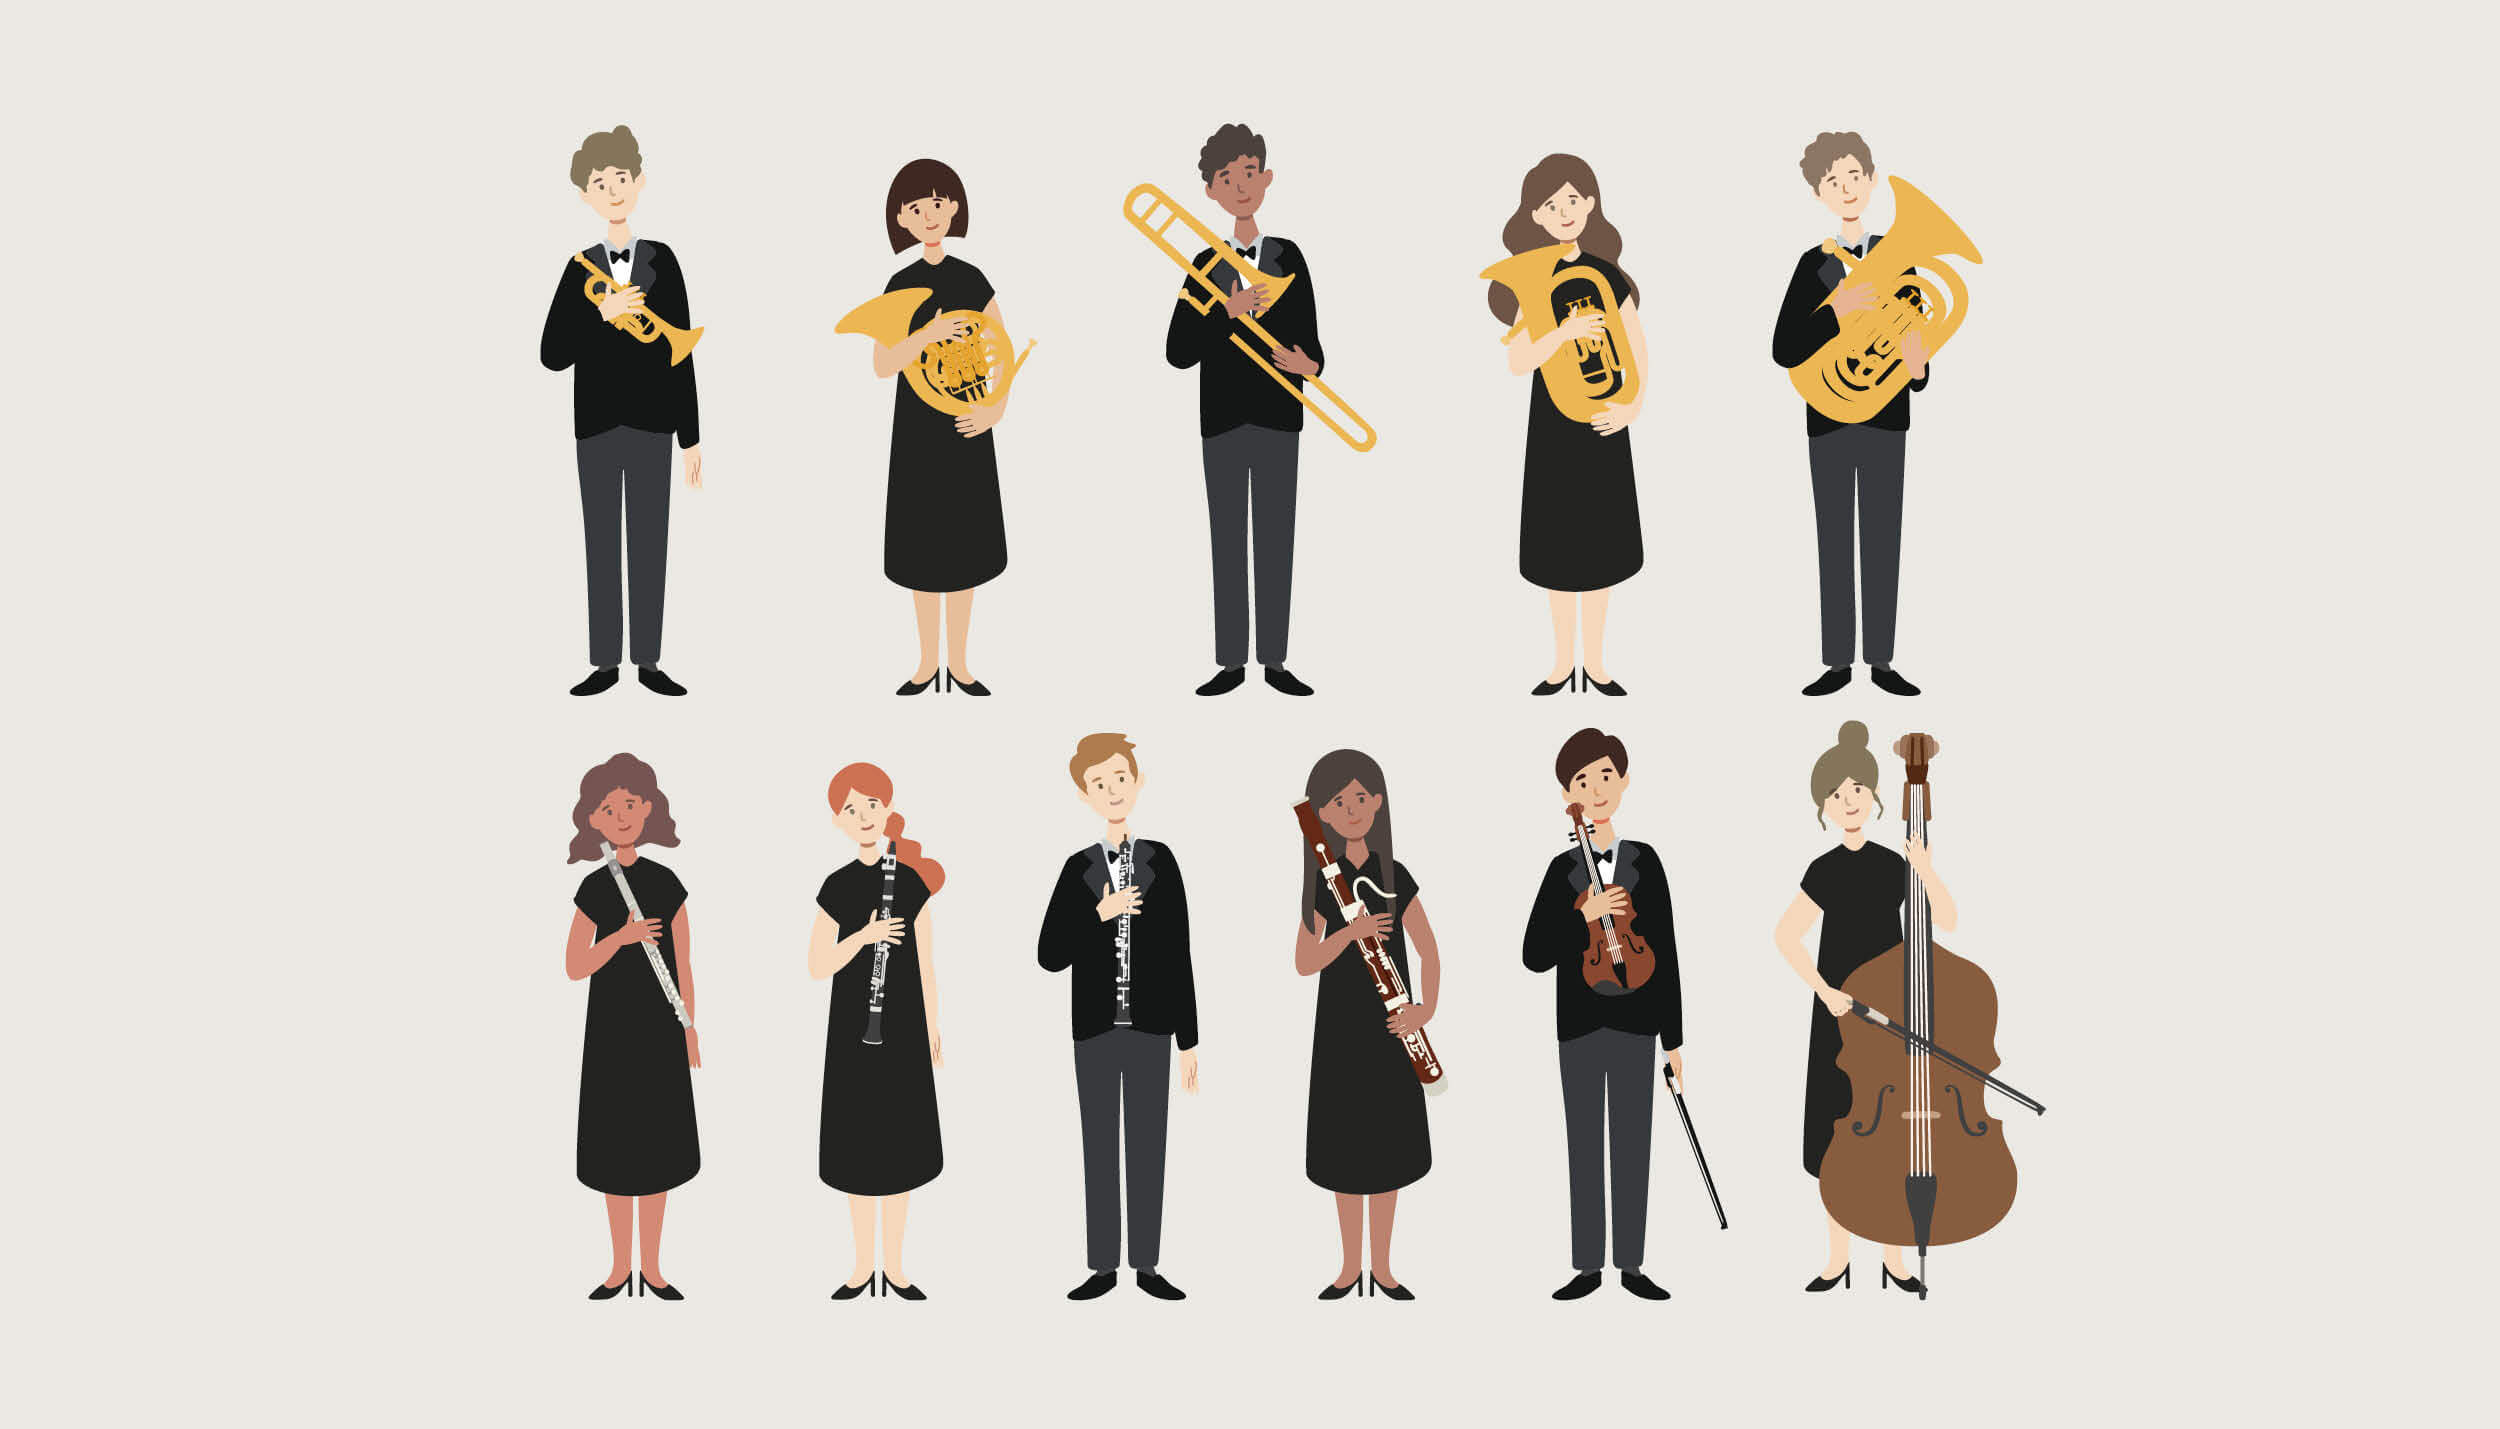 The Young Person’s Guide to the Orchestra key image of a group of cartoon musicians.